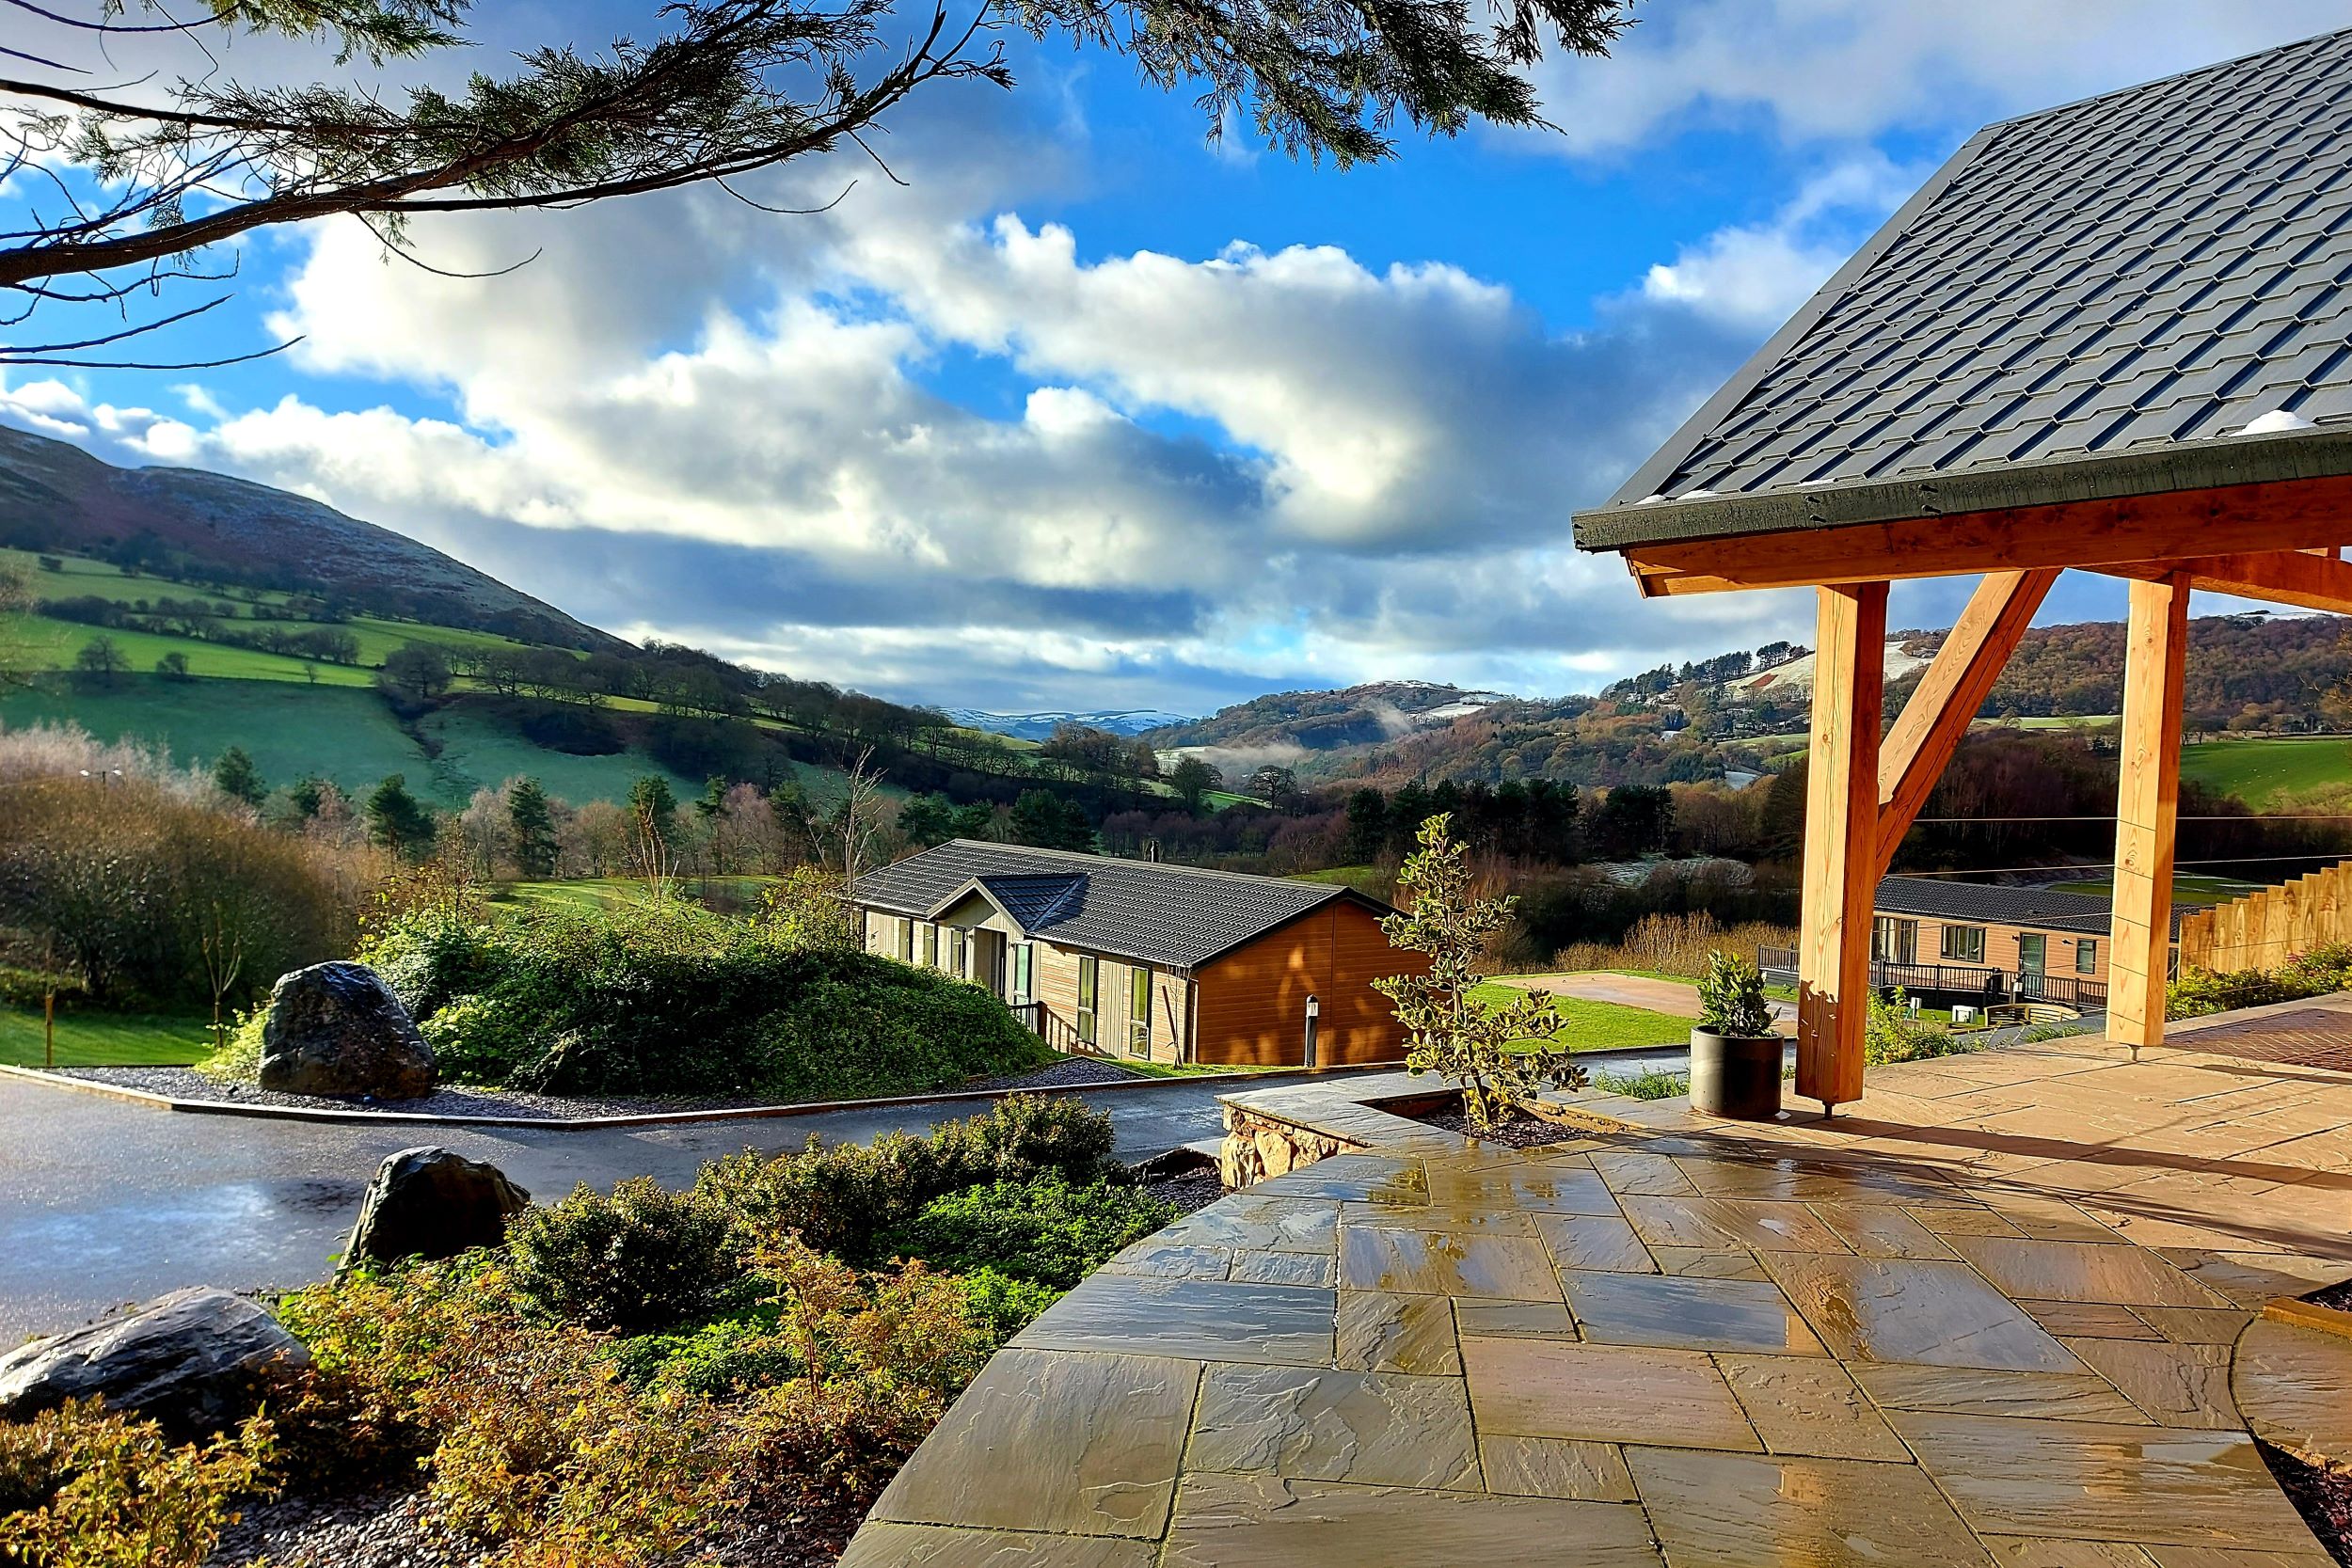 Introducing two luxury lodges for sale at Maes Mynan Park in North Wales.